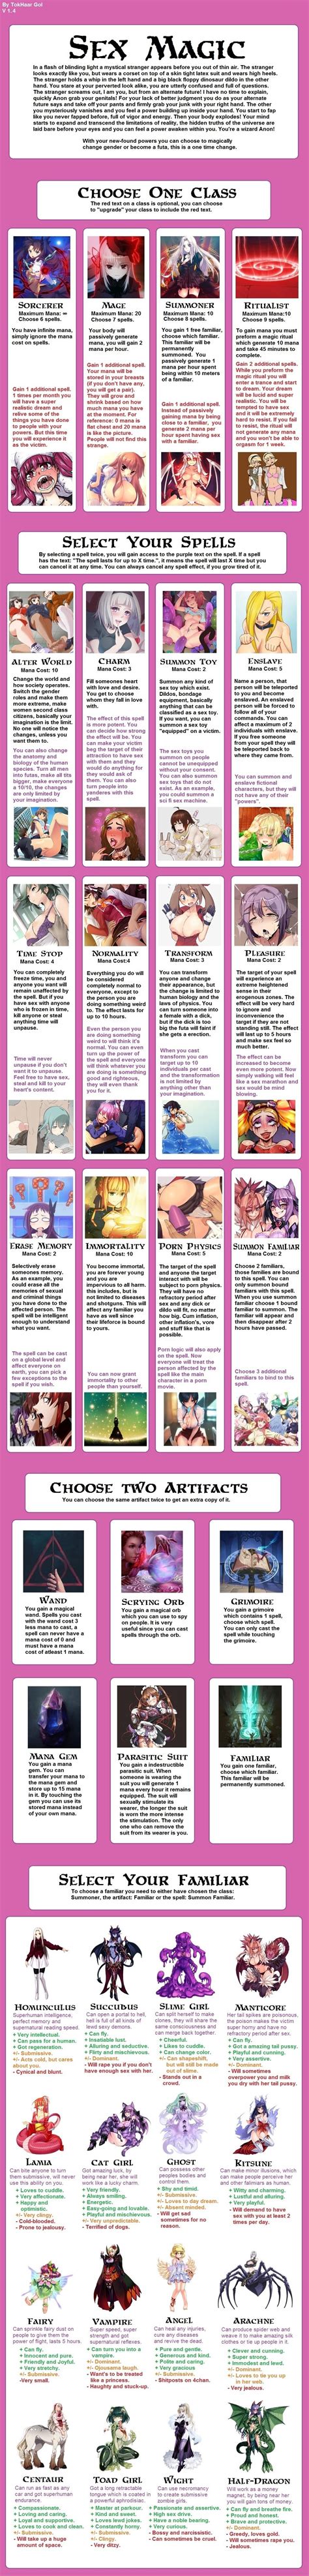 CYOA Starter Template: Cartoon Kings: Pocket Monsters: The Succubus Manor: S.O.N.G. of Your Heart: Lost in Space: Lander Corps: Assassin's Creed: Somno Free Use: Horny Hotel: Femboy Fantasies: Guardian Spirit - PixelGMS: Digimon: Tamamo Transmigration Troubles: Giant Destruction: Cyberpunk - Neon Nexus: Where We Used To Be - Xenoblade: I AM ...